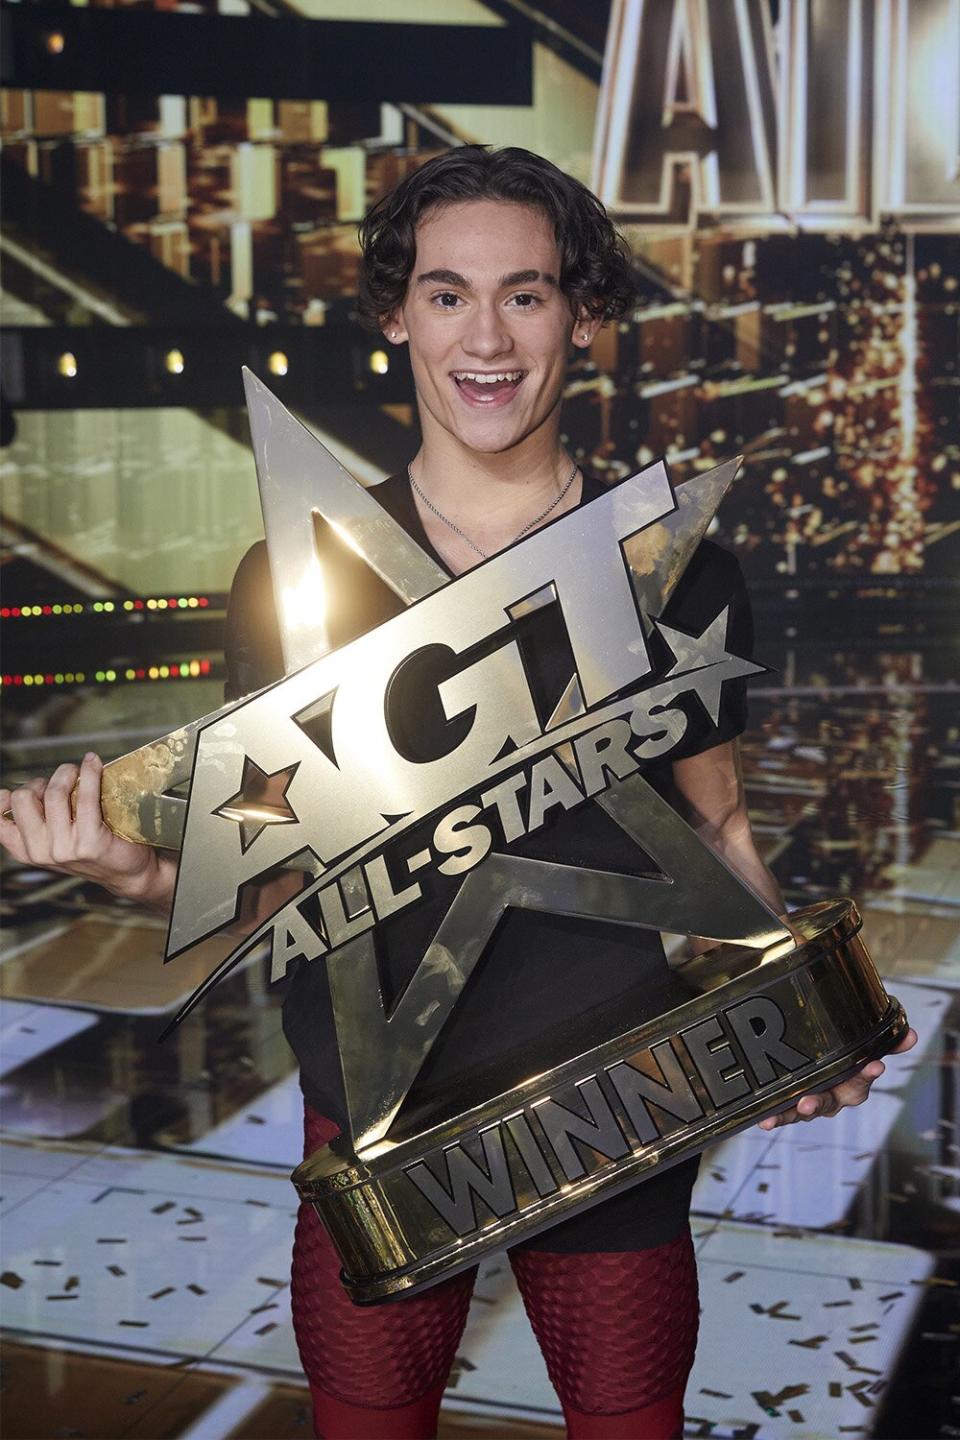 America's Got Talent AllStars Crowns a New Winner! See Who Won — and Made History Along the Way